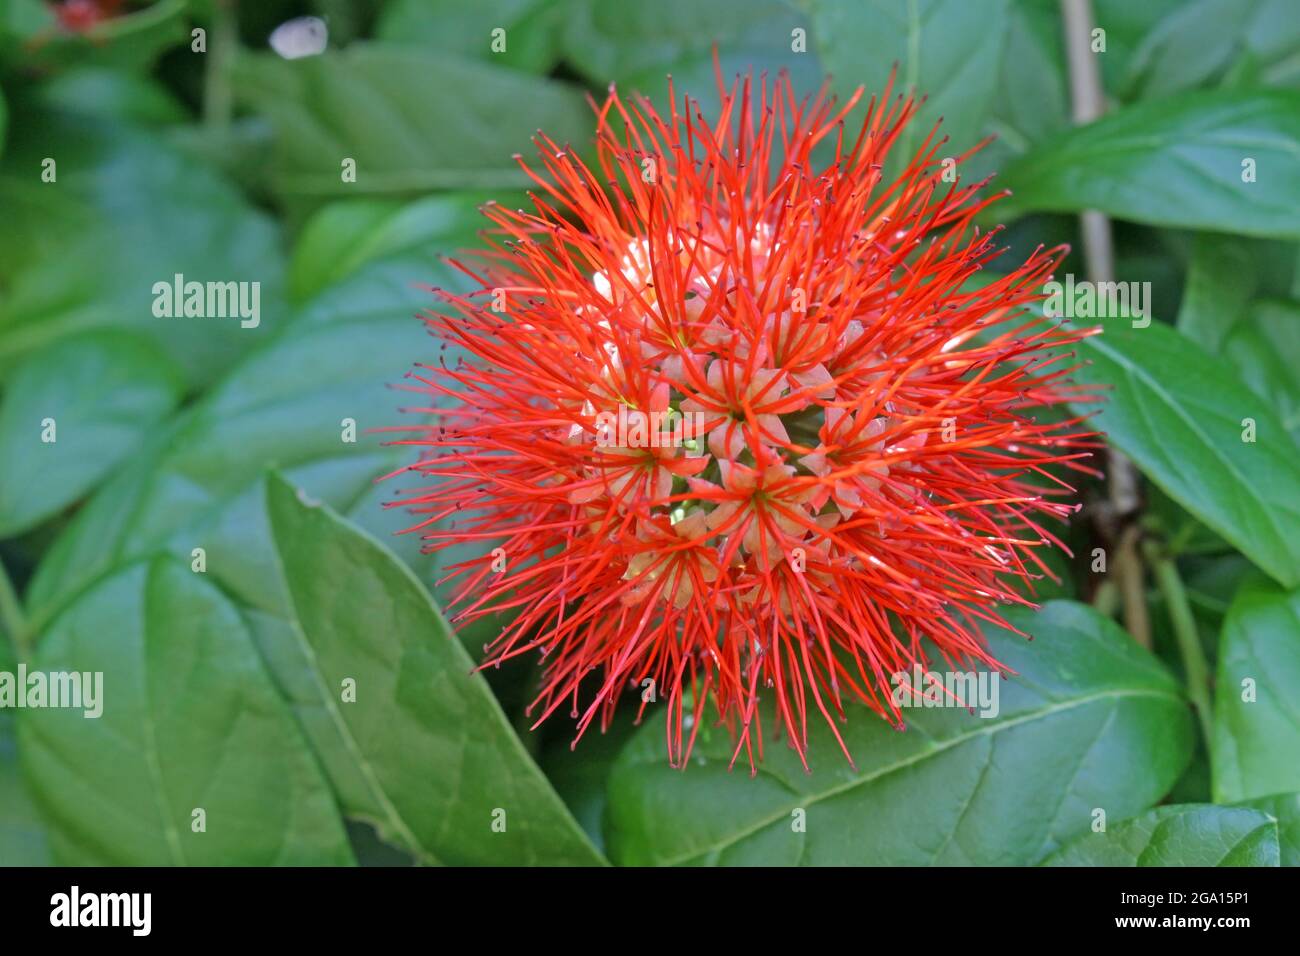 Single spiky red tropical flower Stock Photo